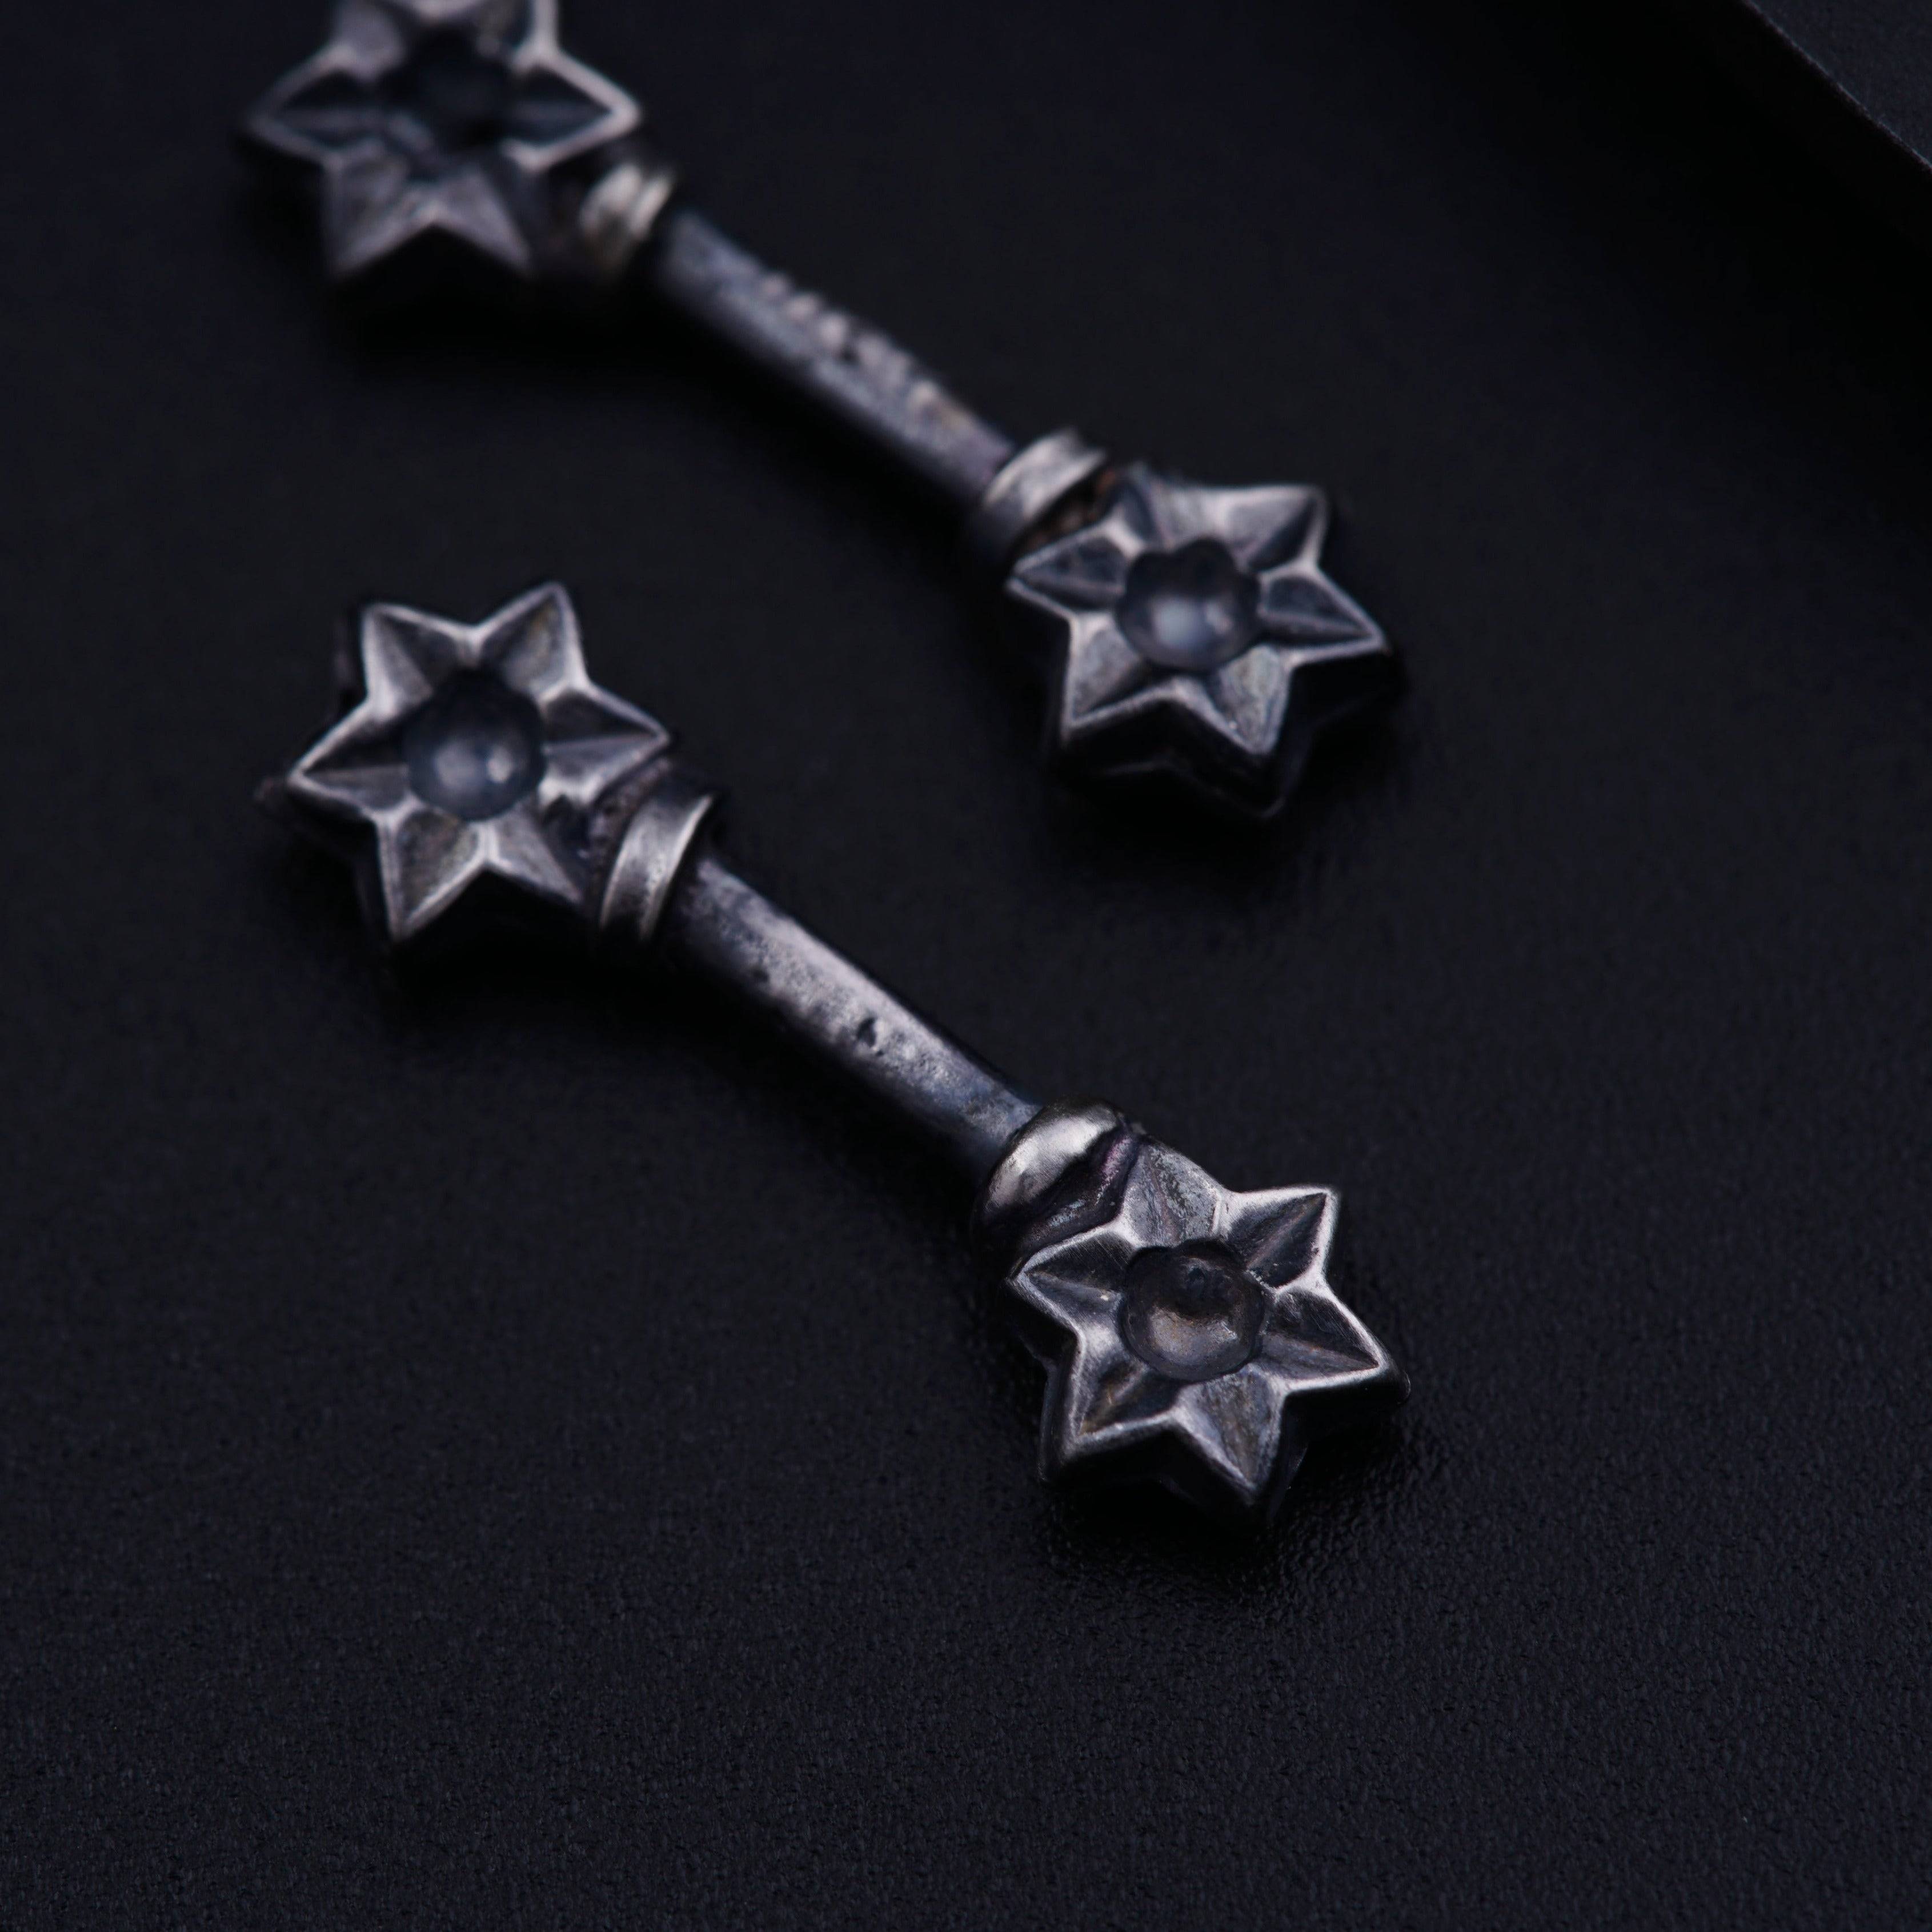 a pair of metal stars on a black surface